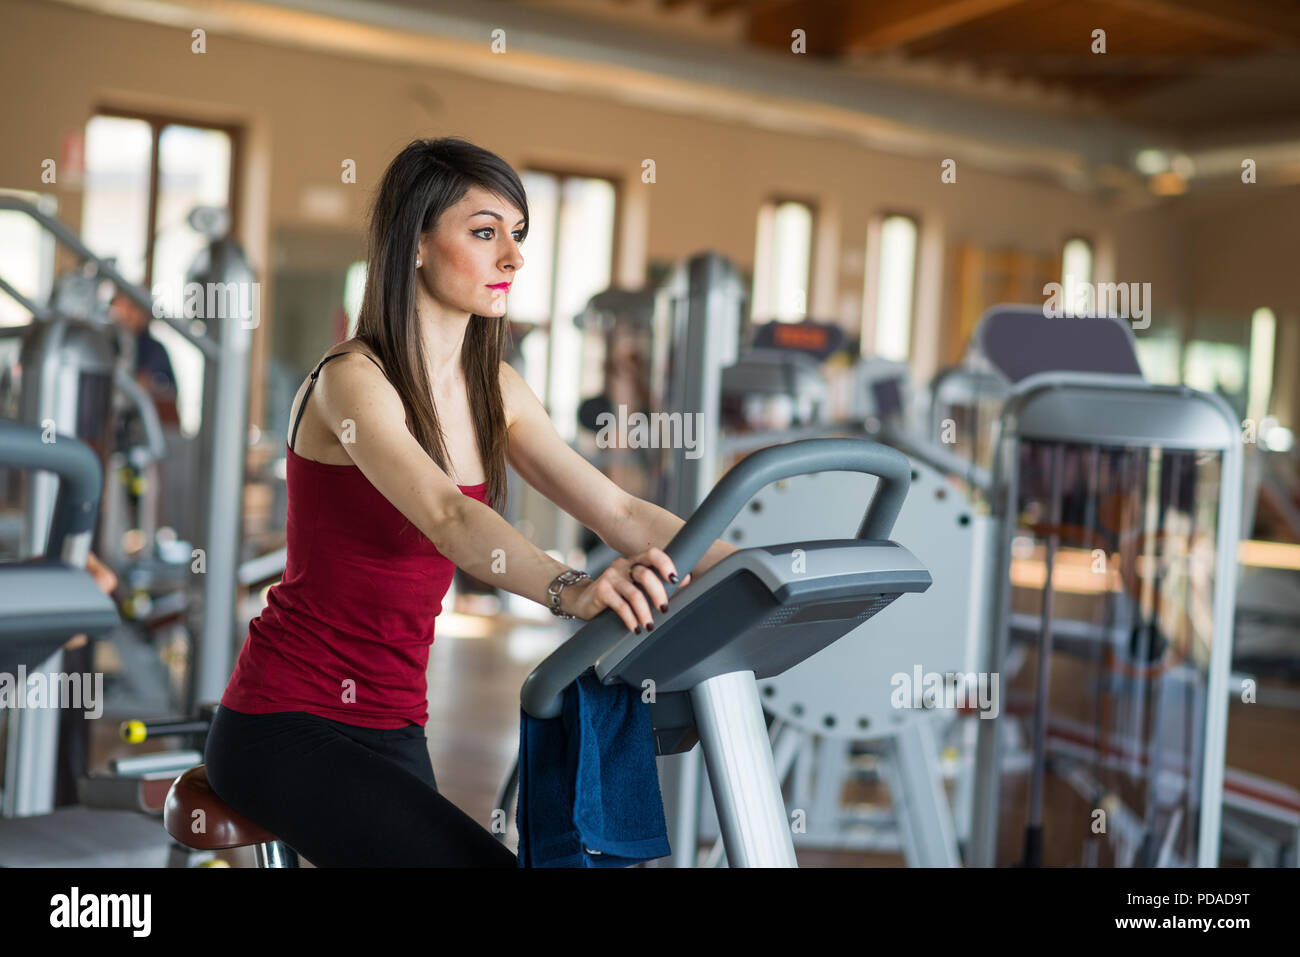 Woman working out on a stationary bike Stock Photo